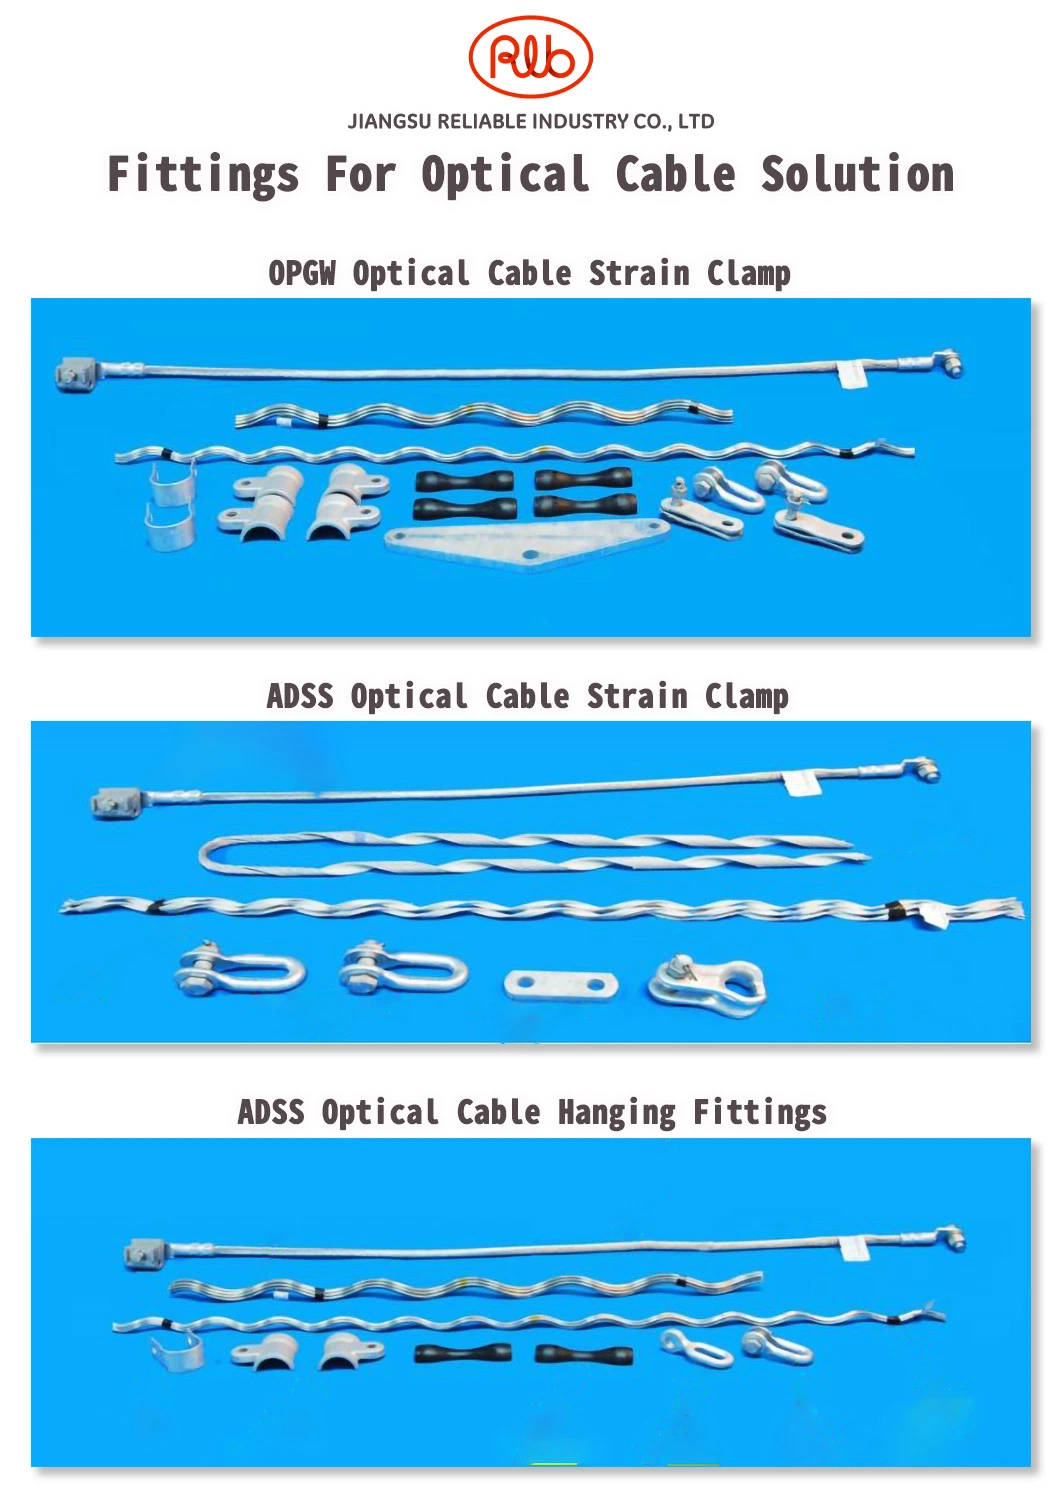 Galvanized Insulated Hanging Fittings for Opgw/ADSS Optical Cable